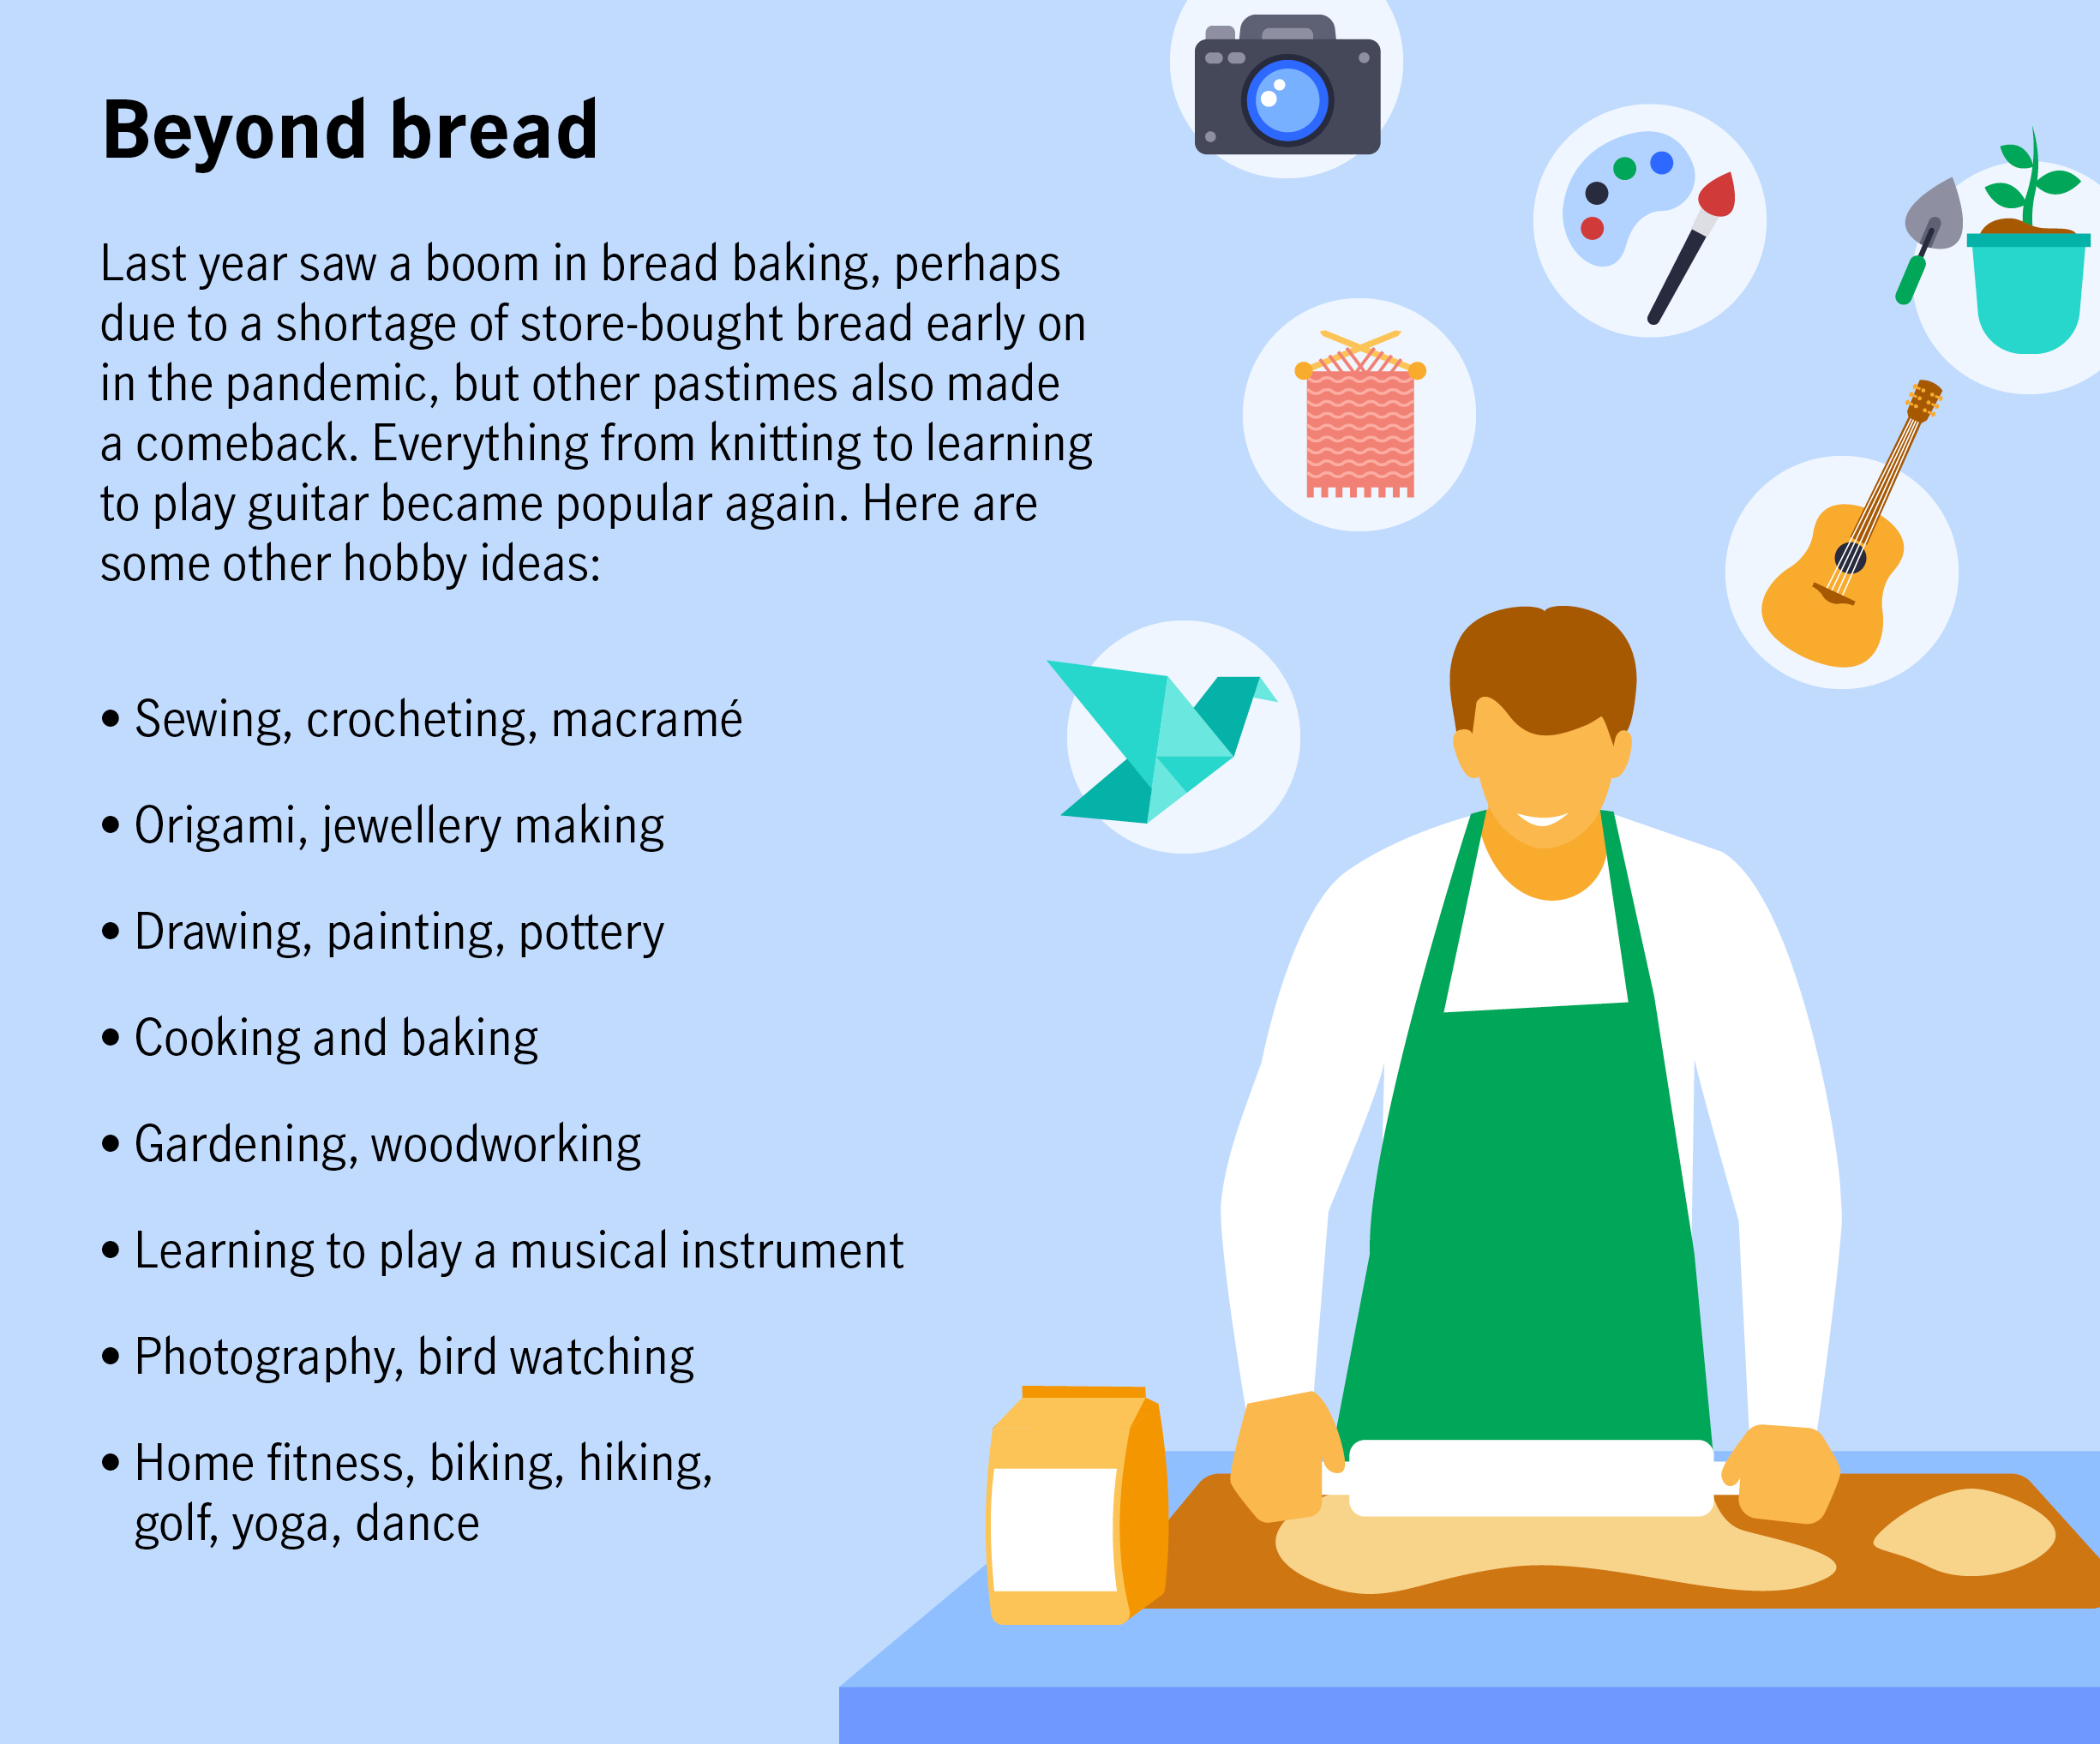 Beyond bread Last year saw a boom in bread baking, perhaps due to a shortage of store-bought bread early on in the pandemic, but other pastimes also made a comeback. Everything from knitting to learning to play guitar became popular again. Here are some other hobby ideas:  Sewing, crocheting, macramé Origami, jewellery making Drawing, painting, pottery Cooking and baking Gardening, woodworking Learning to play a musical instrument Photography, bird watching Home fitness, biking, hiking, golf, yoga, dance